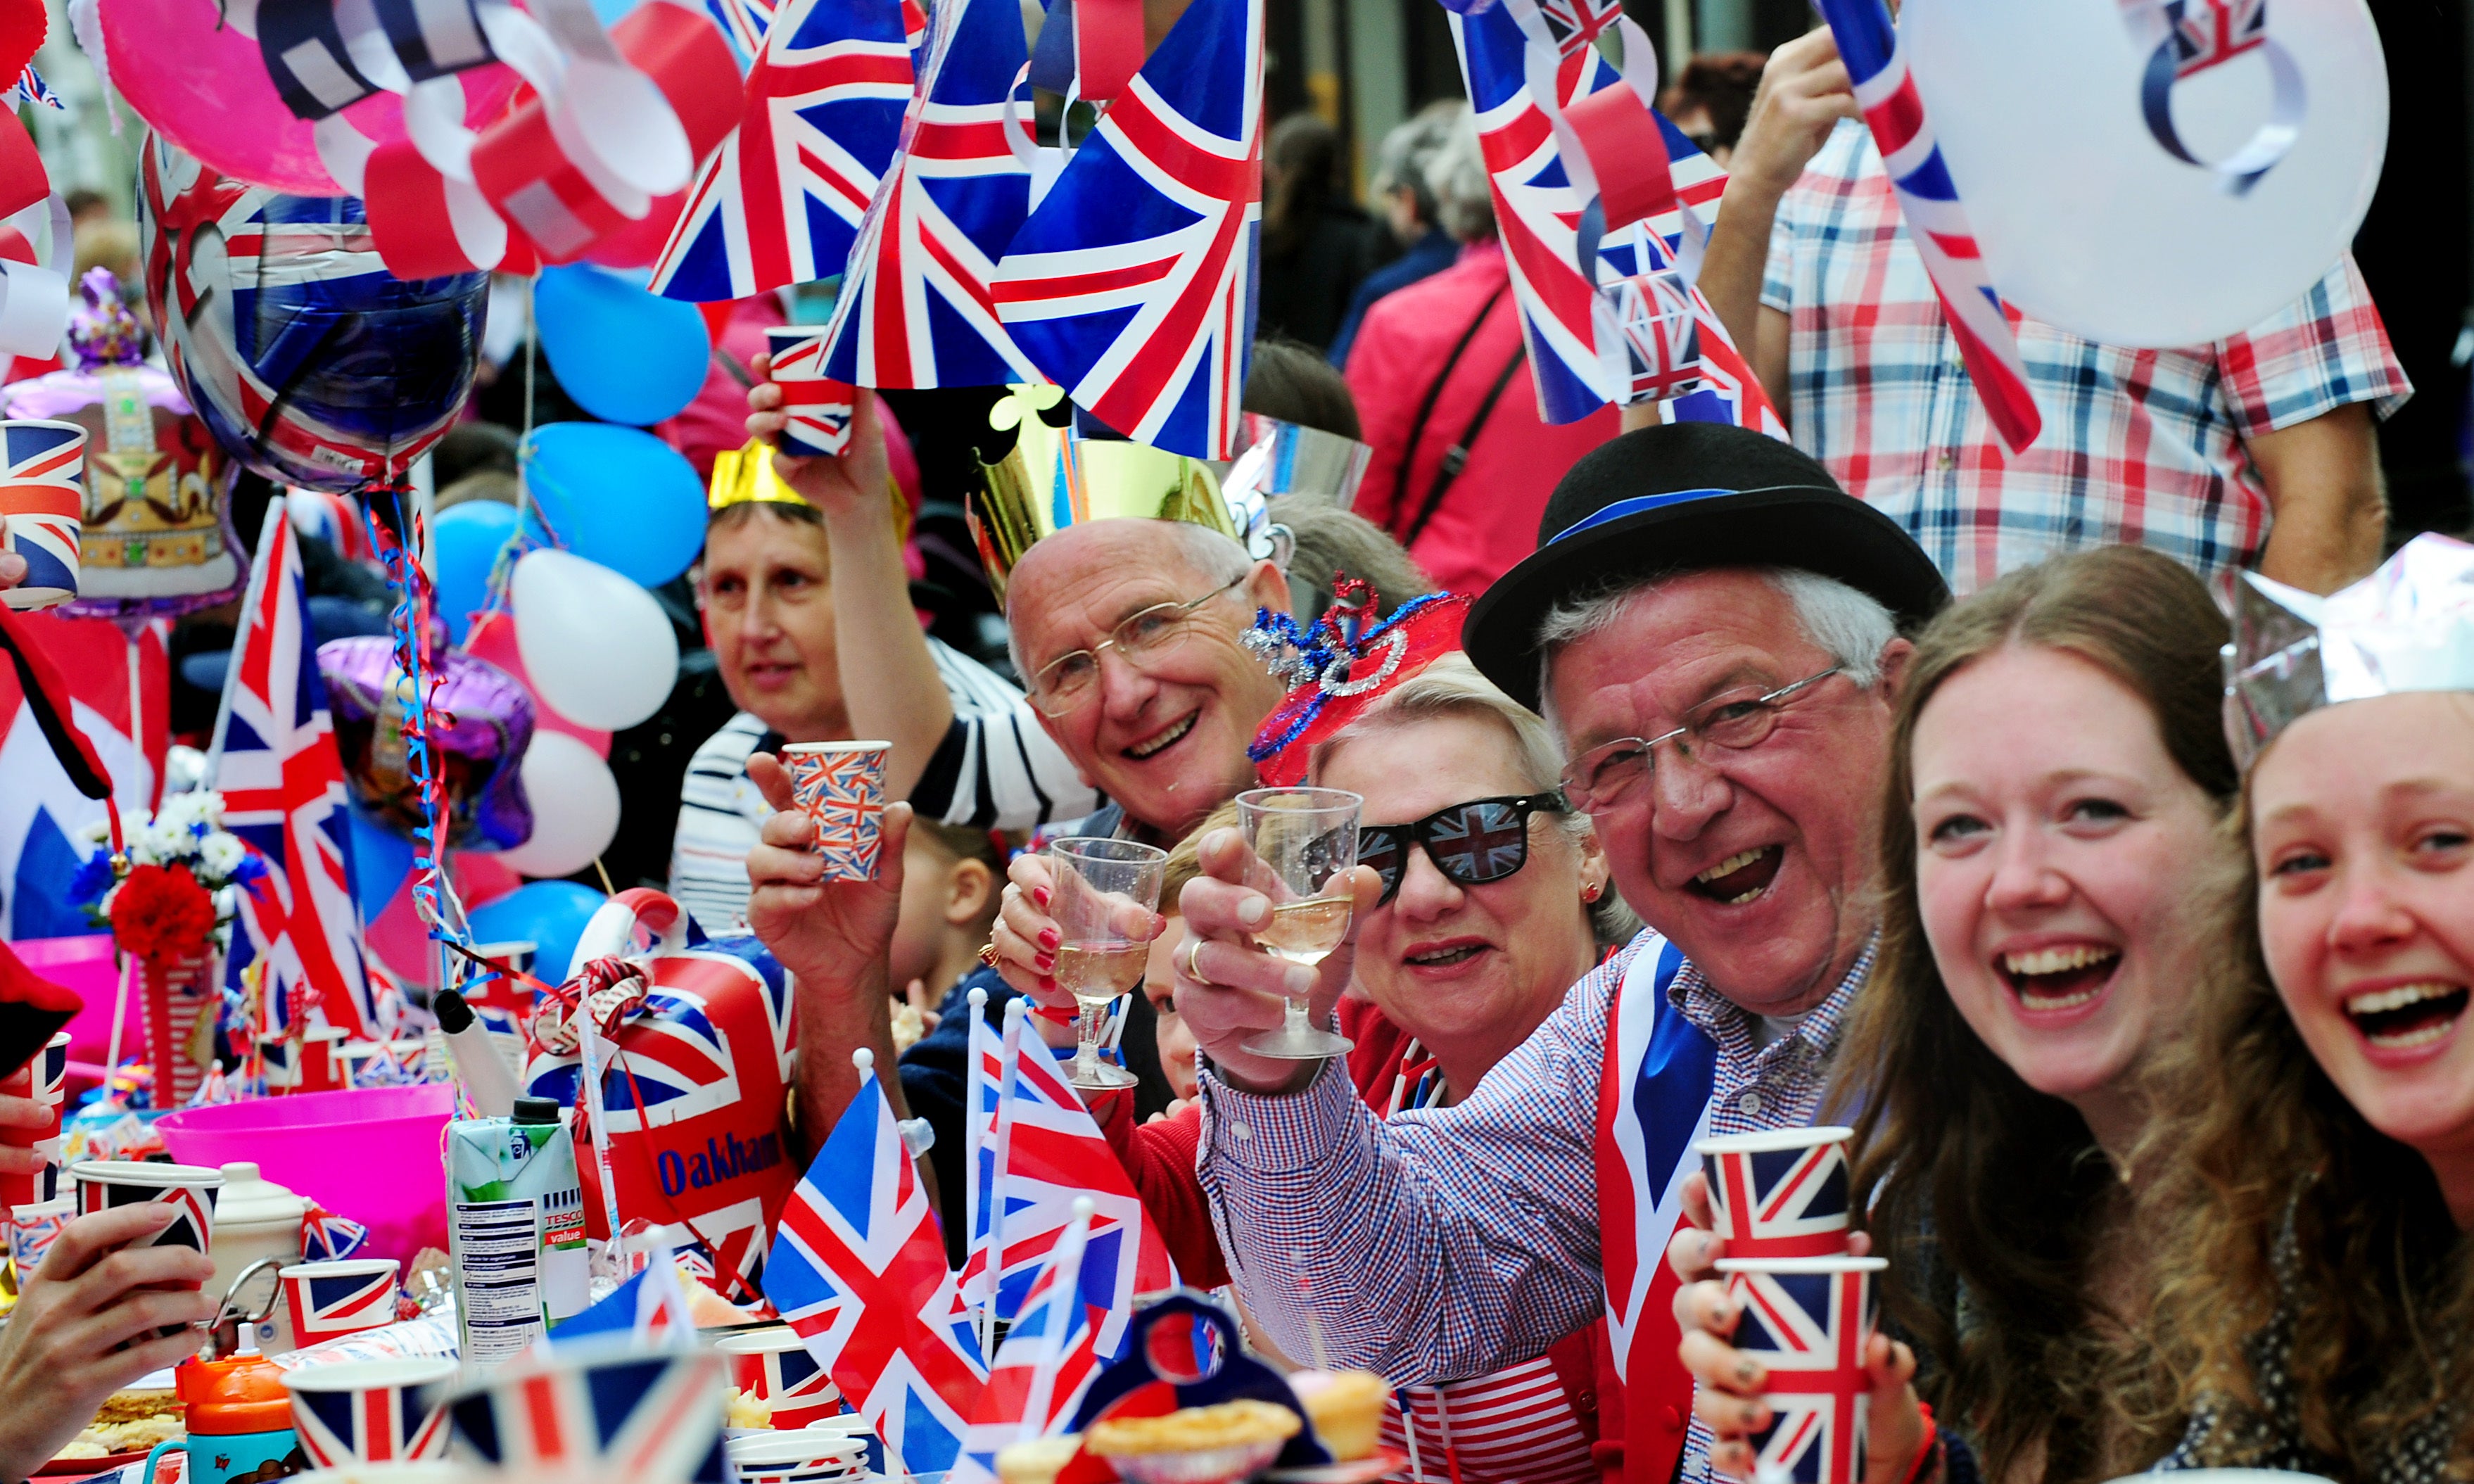 A culture minister has urged councils to show “a little bit of flexibility” when it comes to issuing licences for street parties (Rui Vieira/PA)